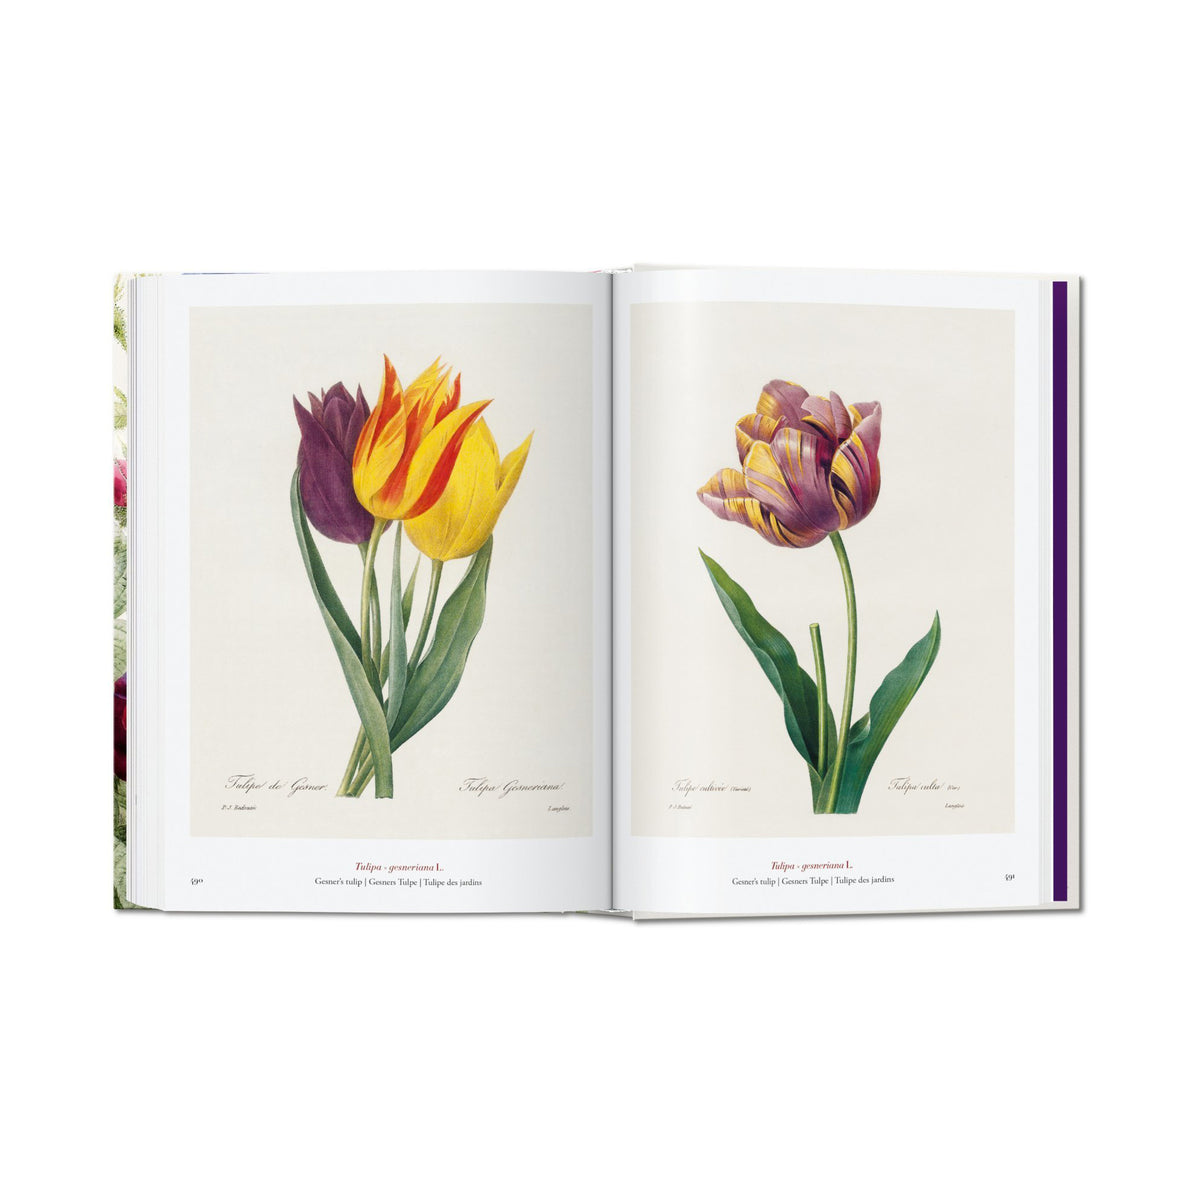 Redouté. Book of Flowers. 40th Aniversary Edition